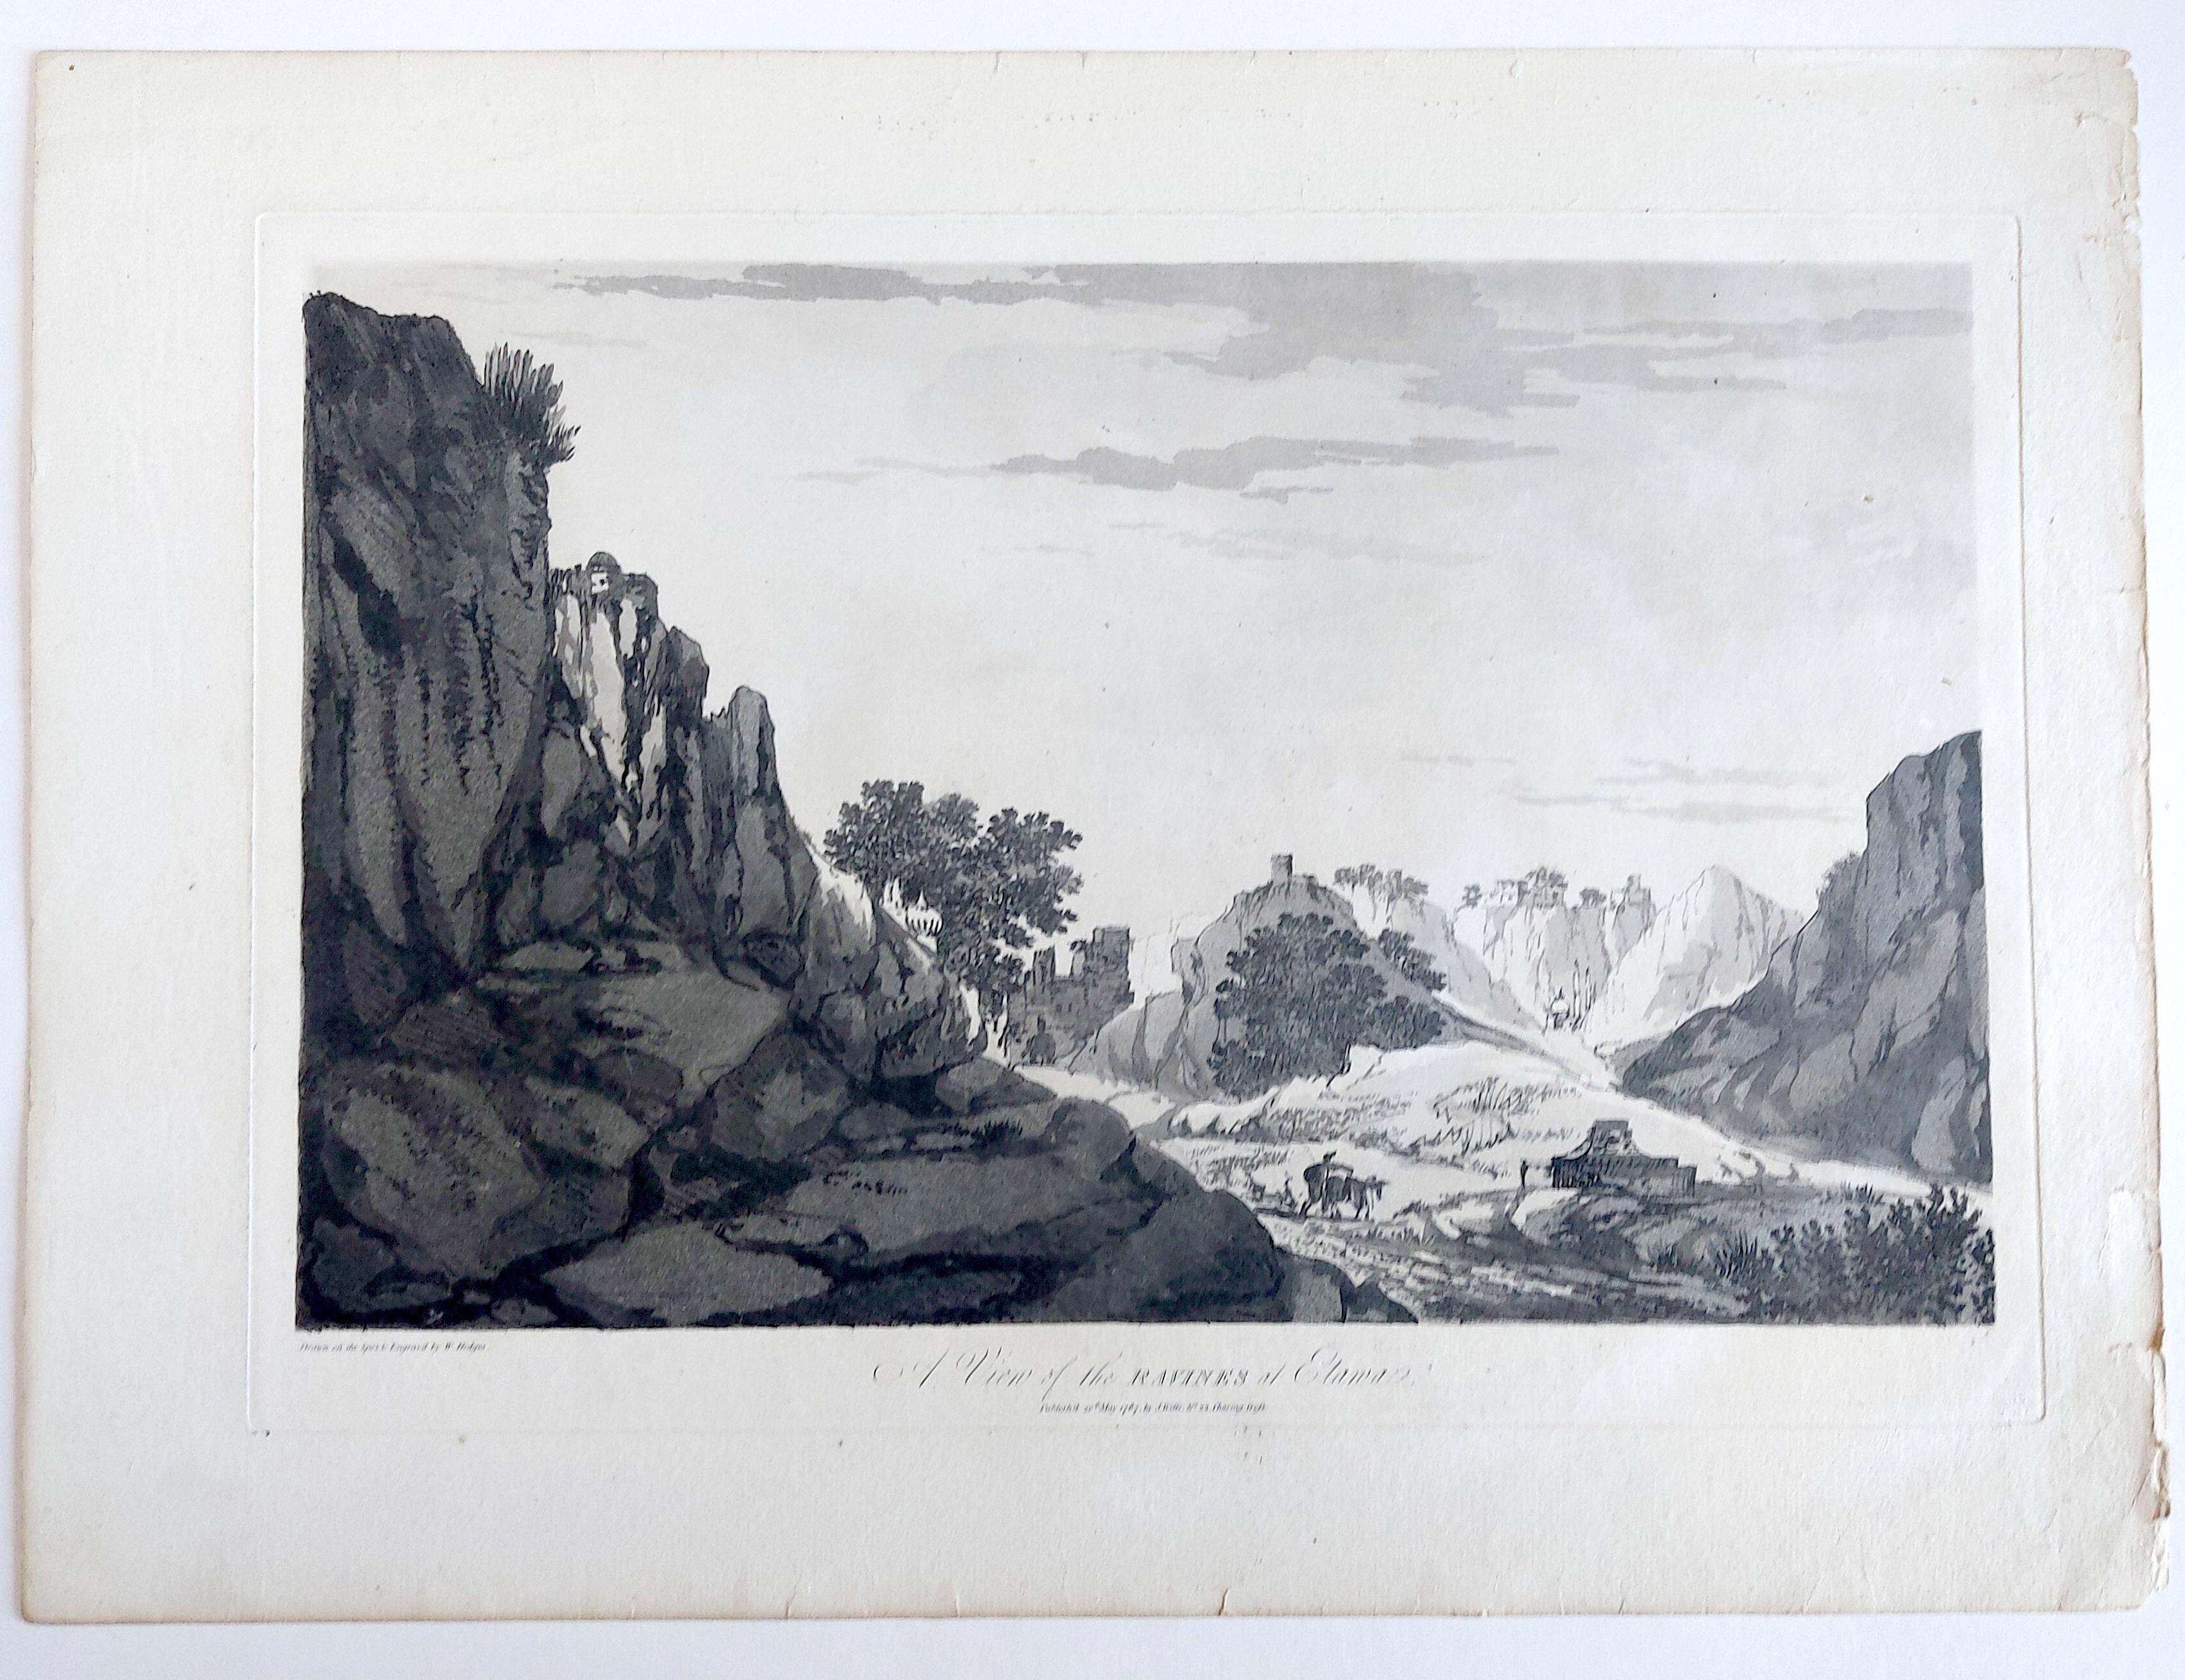 William Hodges 

Plate 27 'A View of the Ravines at Etawa'
Published 20th May 1787 by J Wells, 22 Charing Cross. 
Page size, 16.5” x 22.5”, image 11.25 x 18”


Aquatint with soft ground etching from the seminal publication, Selected Views in India,